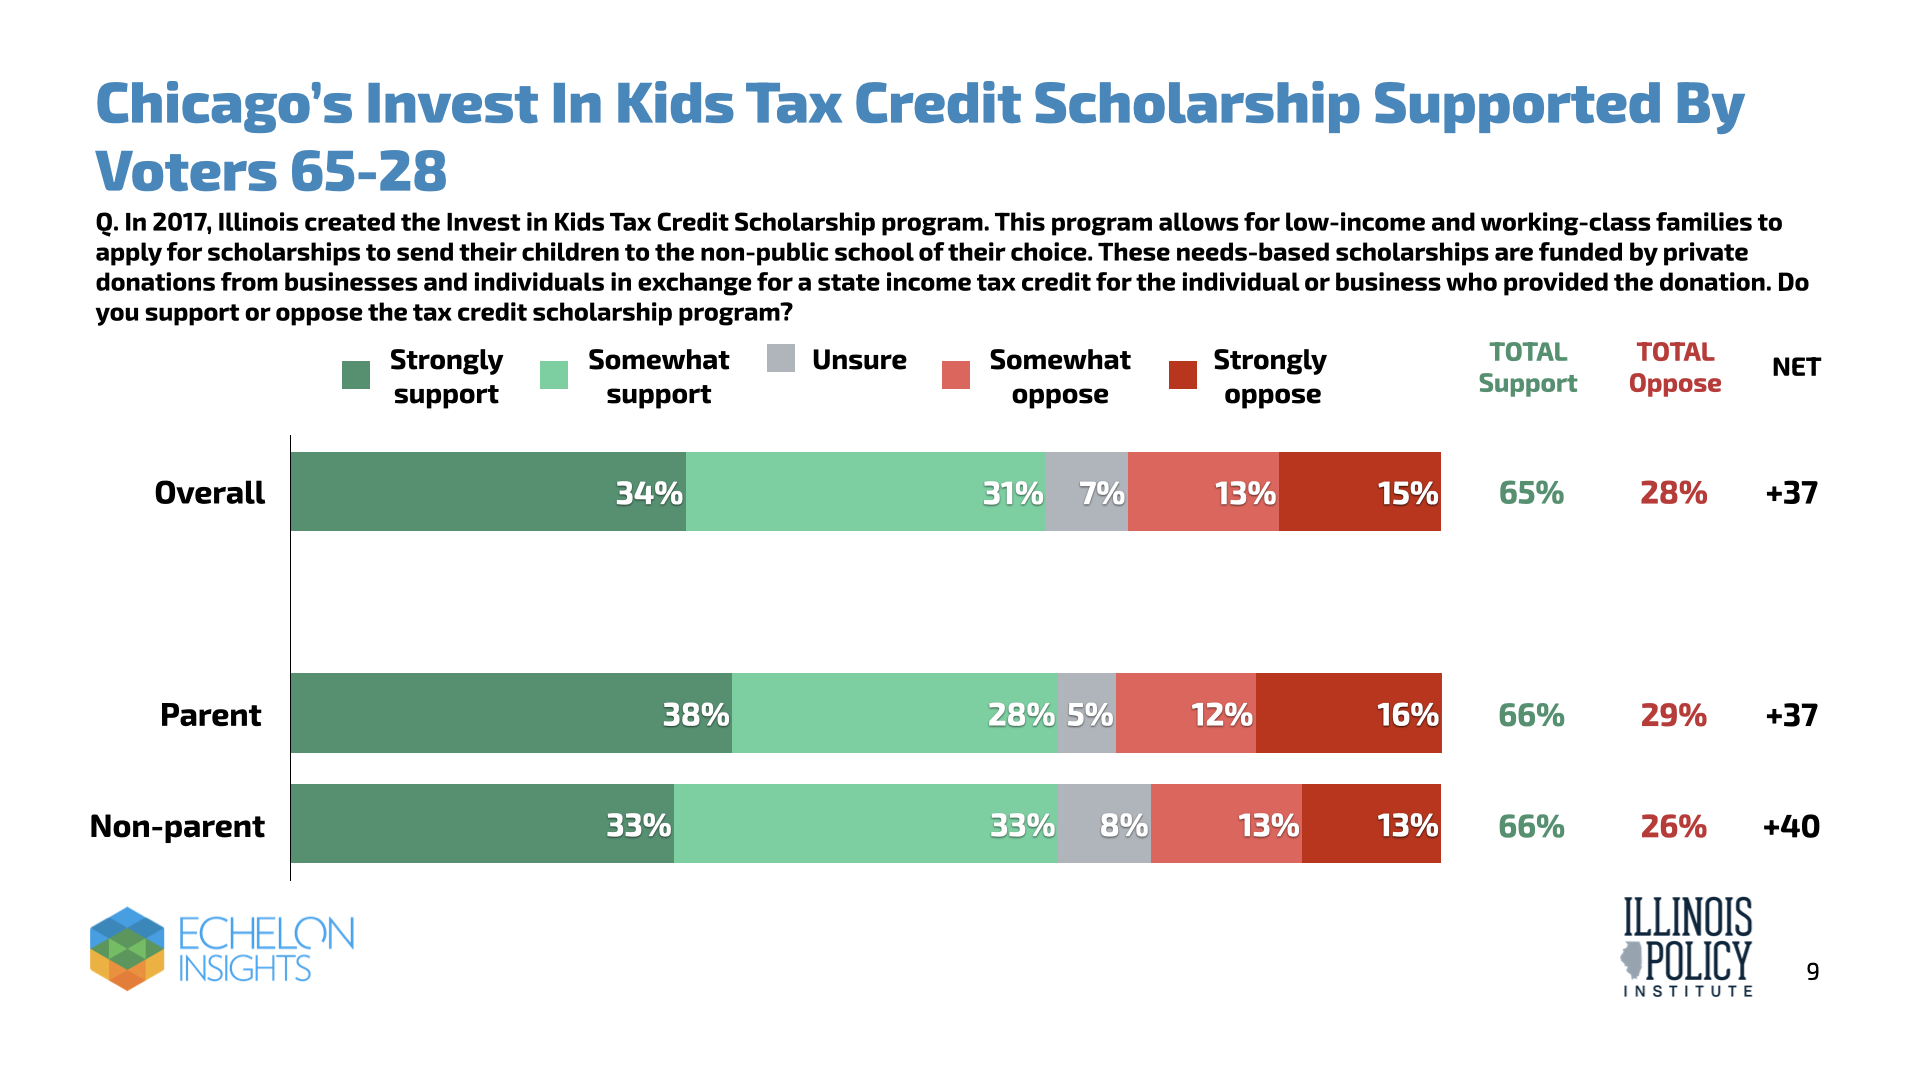 Chicago's Invest in Kids tax credit scholarship support by voters 65-28